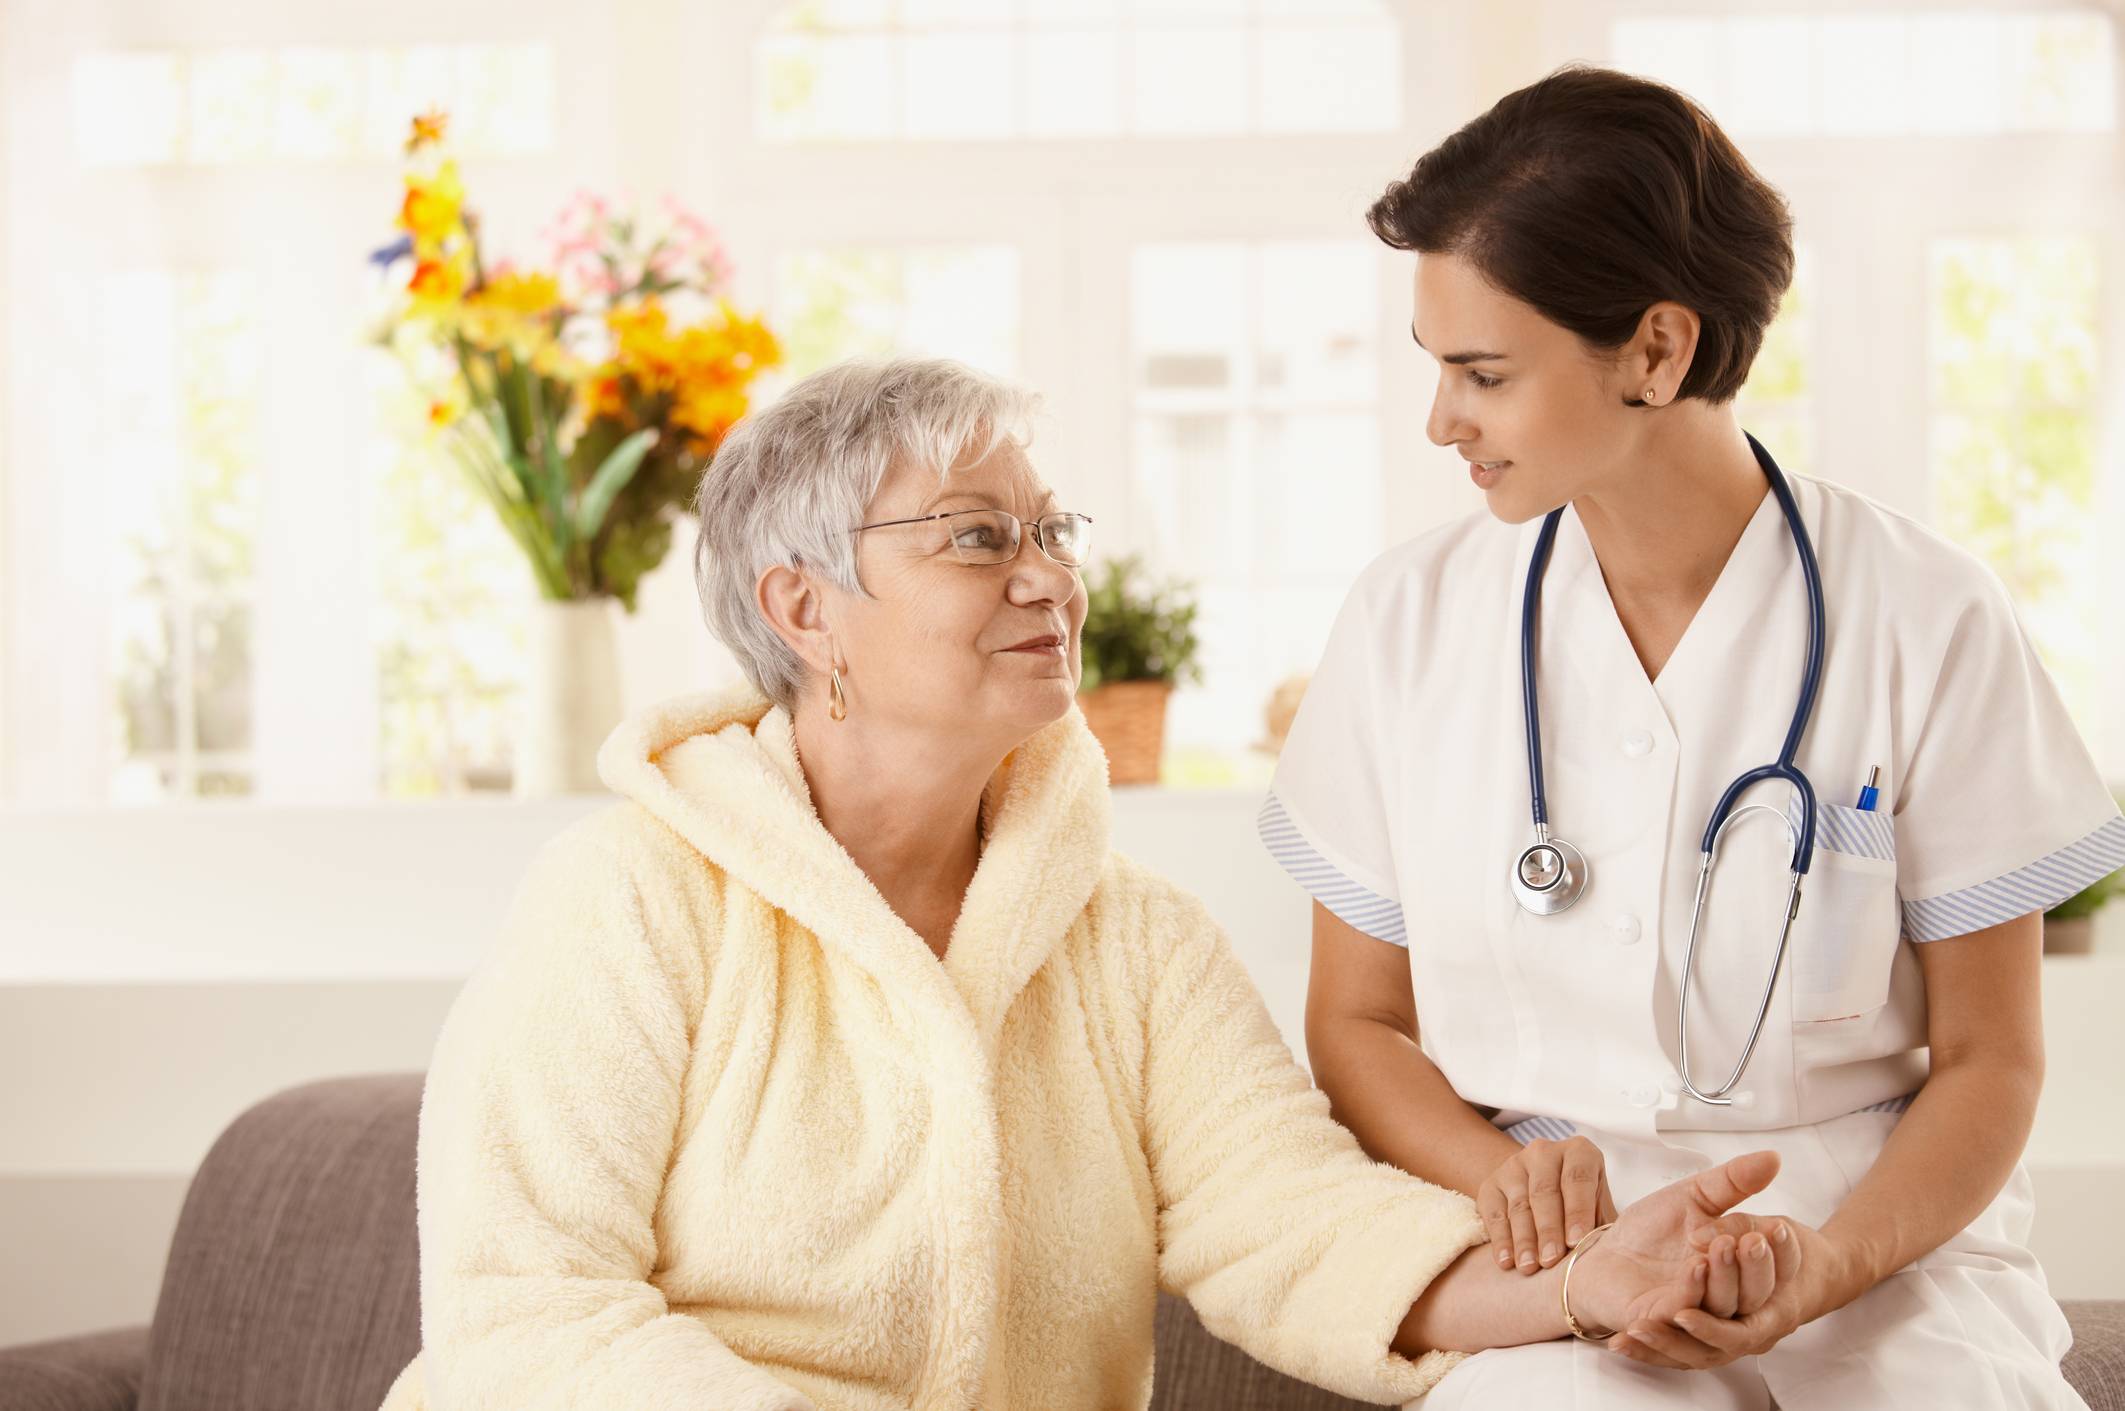 home health care agency business plan